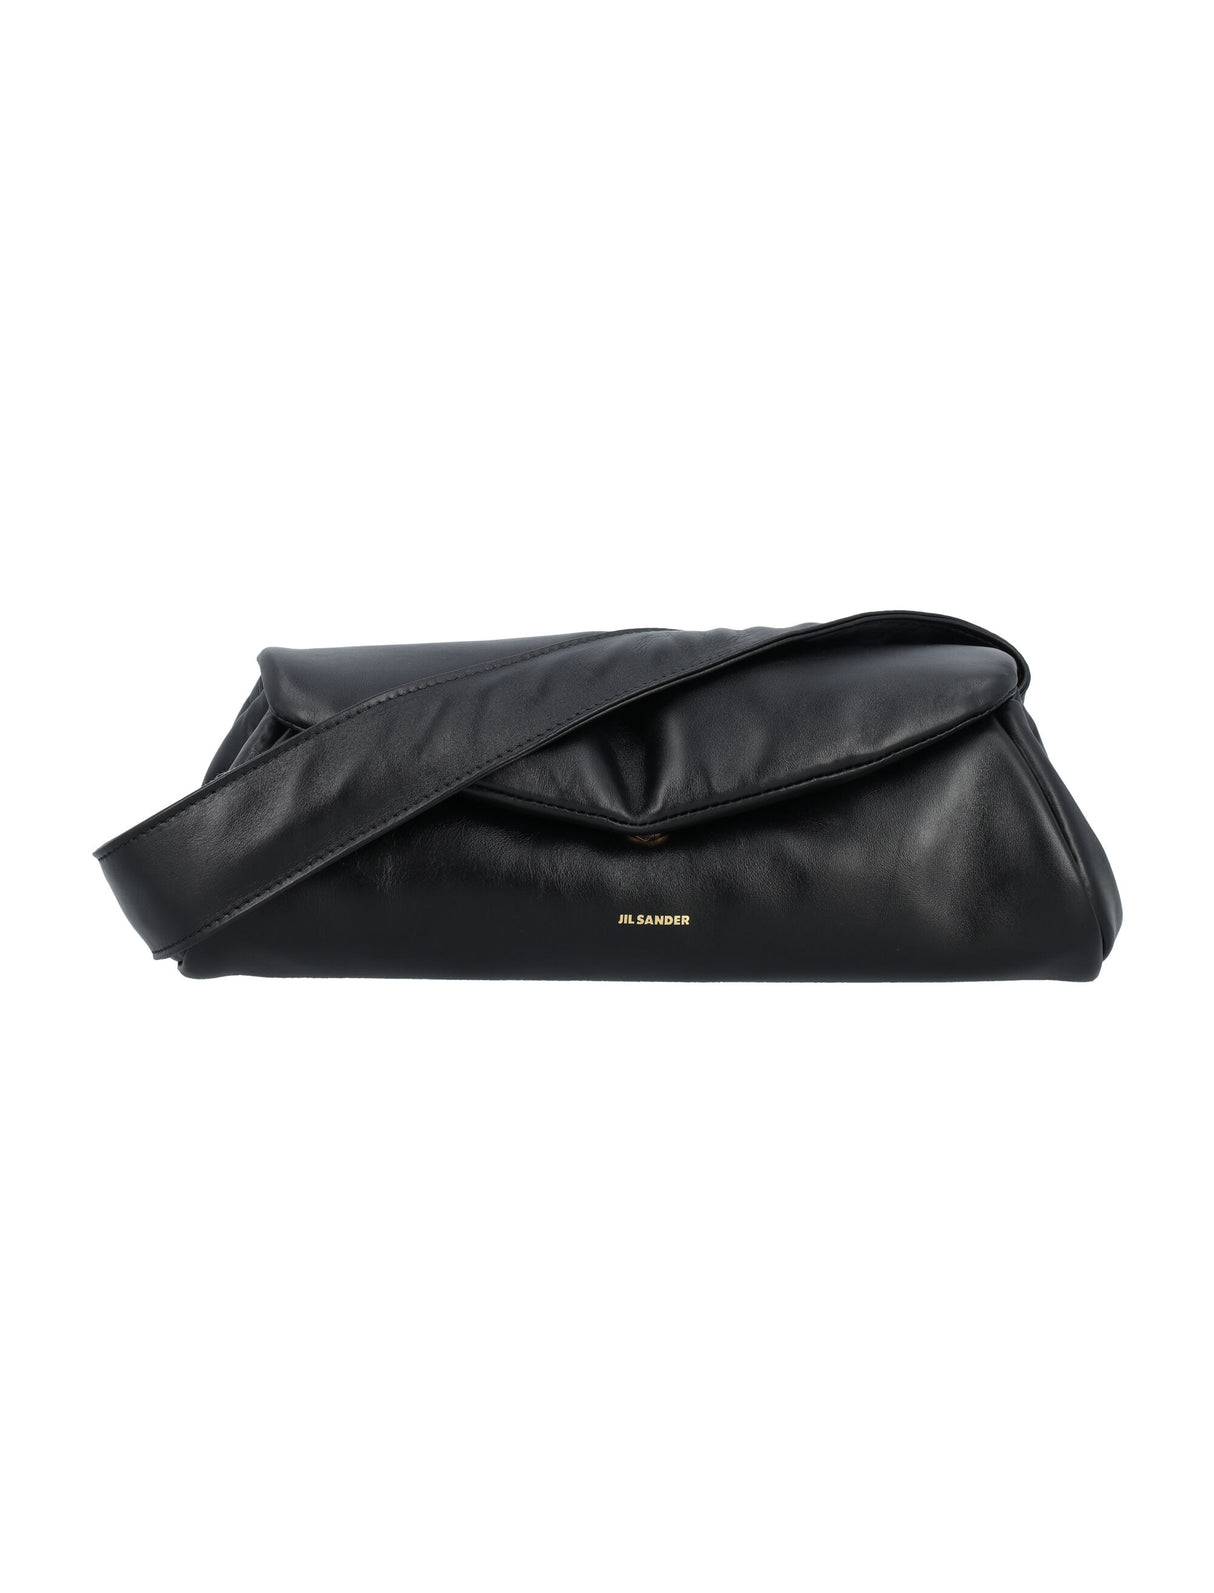 JIL SANDER Mini Padded Cannolo Leather Clutch with Adjustable Strap and Gold-Tone Accents - Black